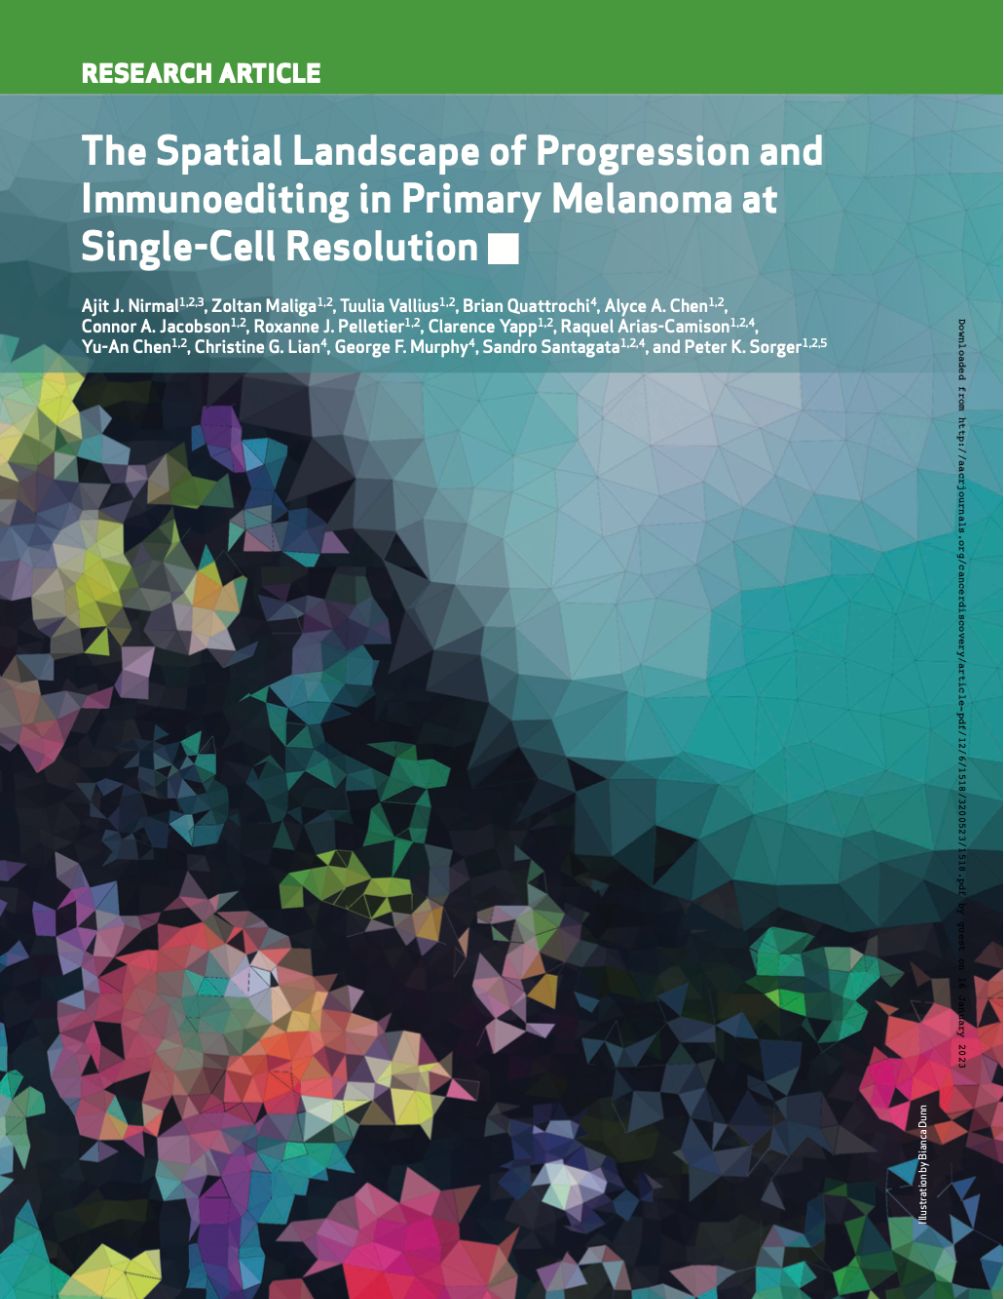 The Spatial Landscape of Progression and Immunoediting in Primary Melanoma at Single-Cell Resolution